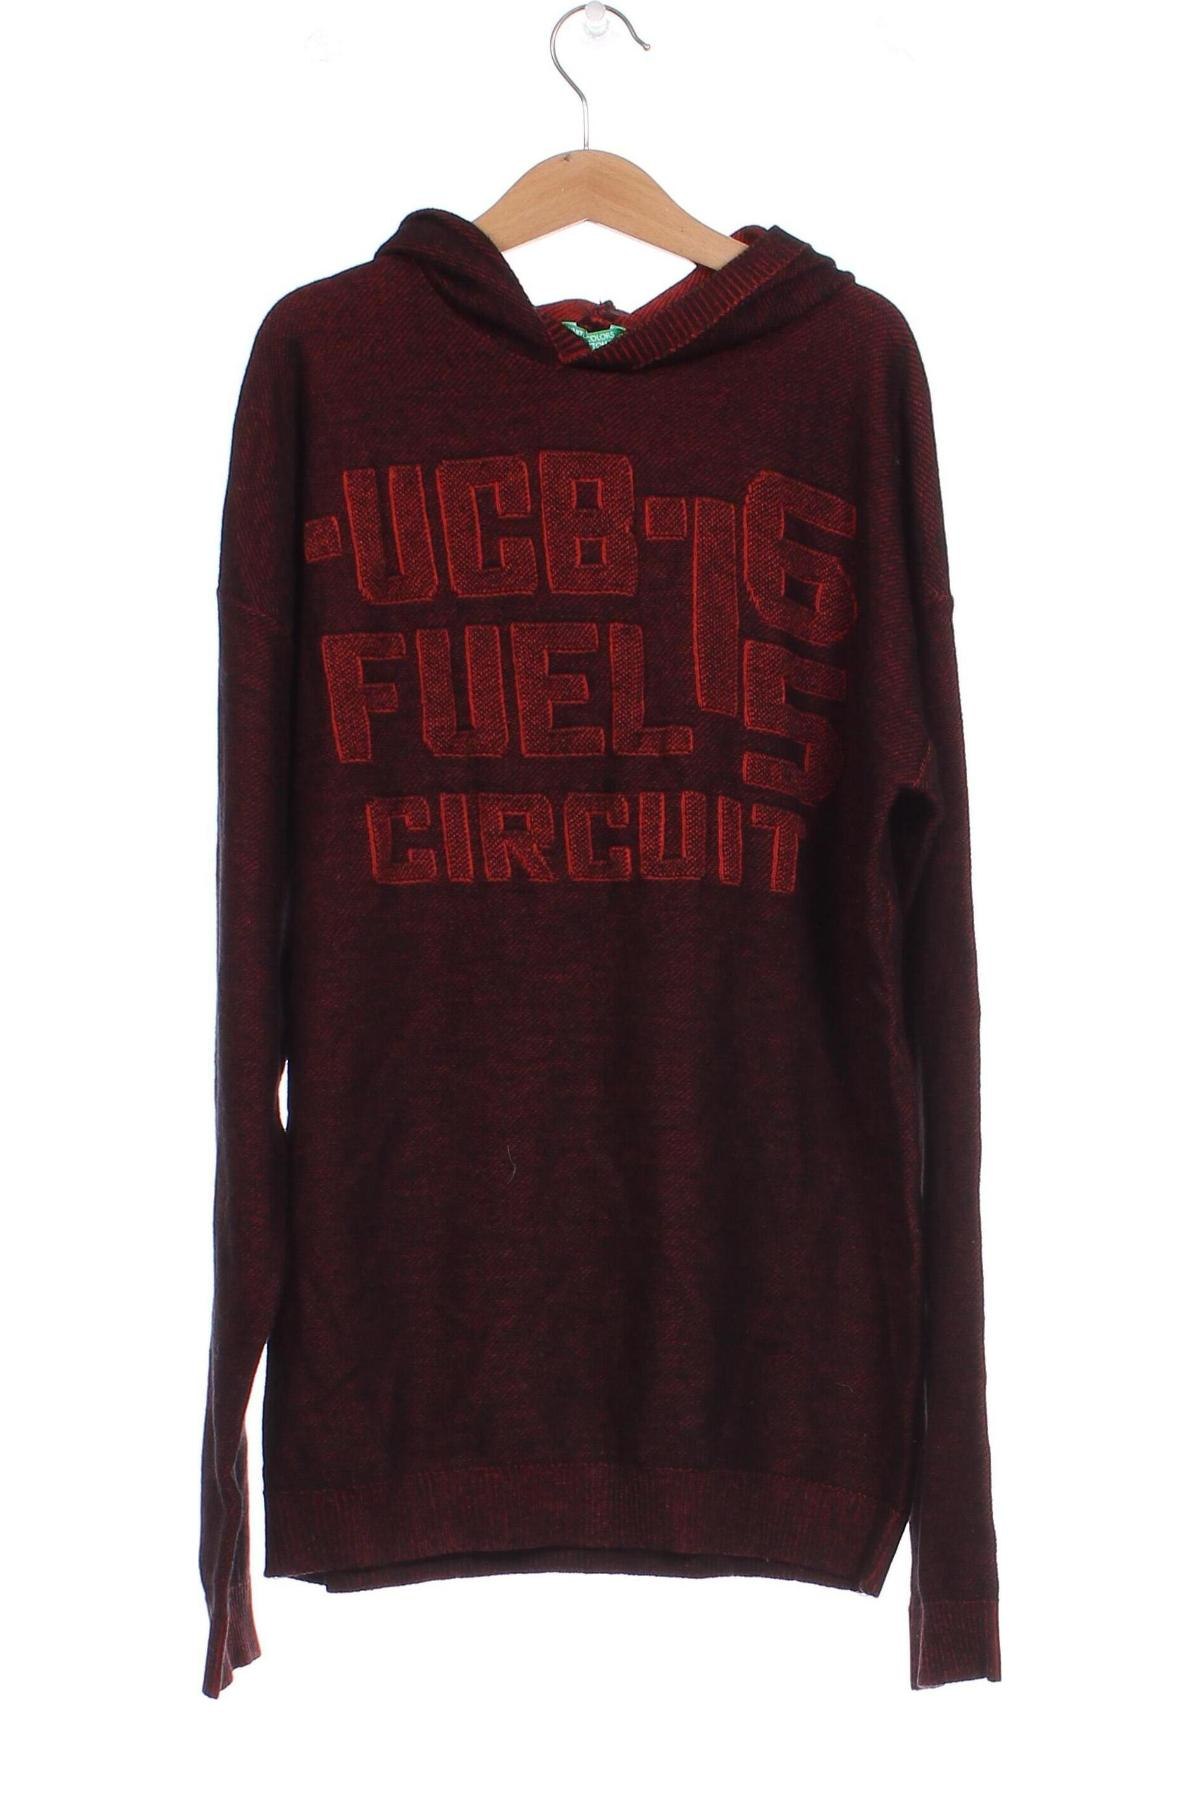 Kinderpullover United Colors Of Benetton, Größe 14-15y/ 168-170 cm, Farbe Rot, Preis € 8,42